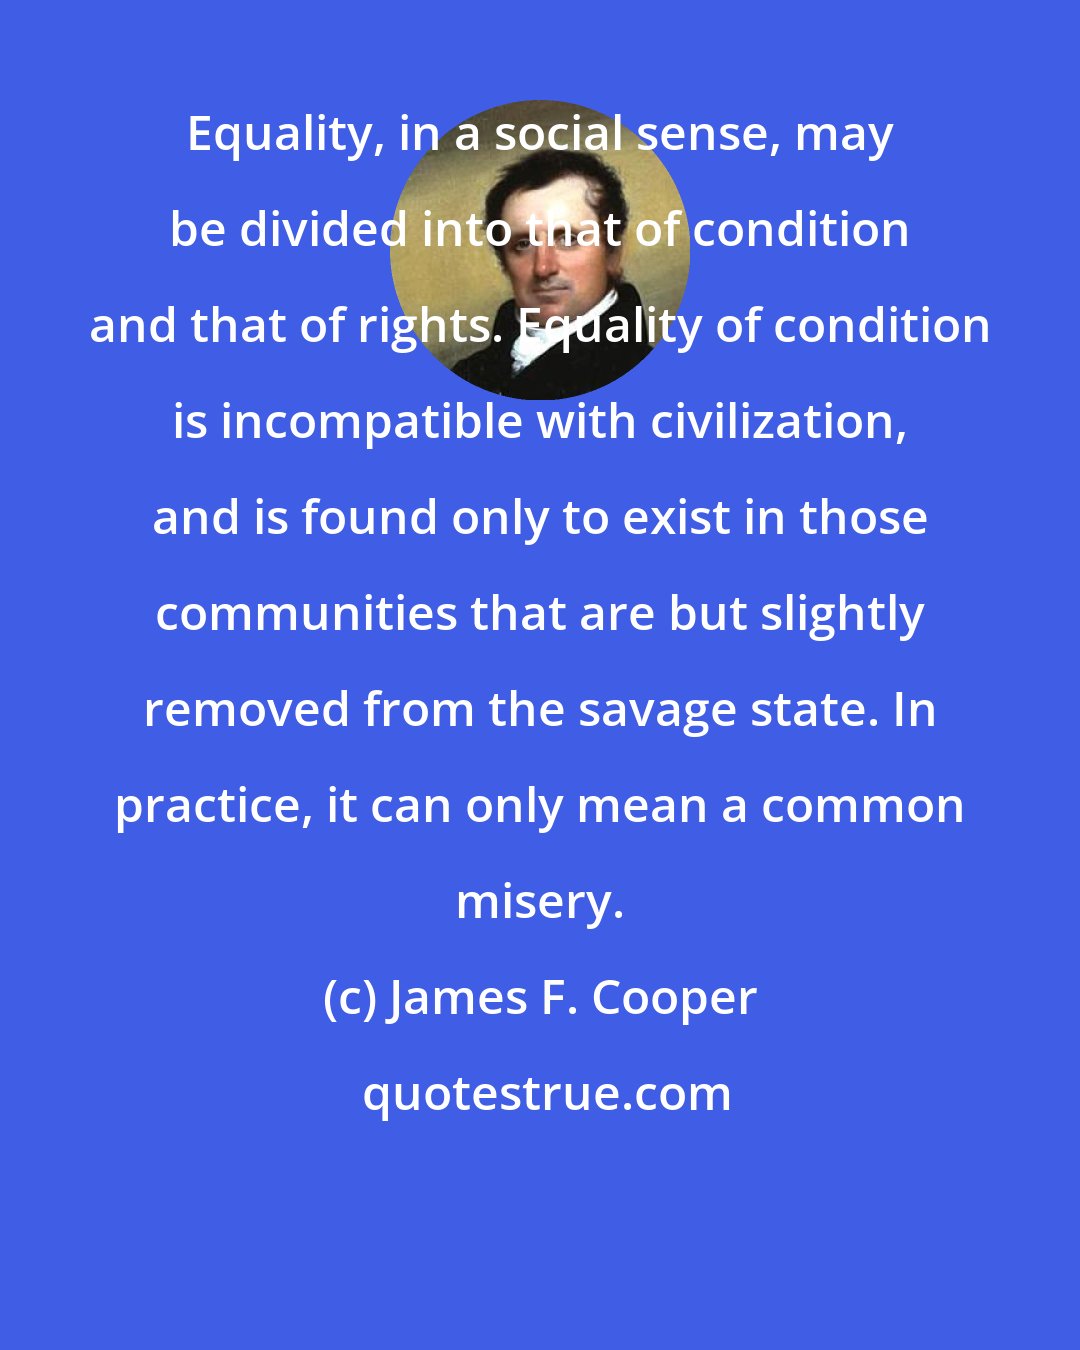 James F. Cooper: Equality, in a social sense, may be divided into that of condition and that of rights. Equality of condition is incompatible with civilization, and is found only to exist in those communities that are but slightly removed from the savage state. In practice, it can only mean a common misery.